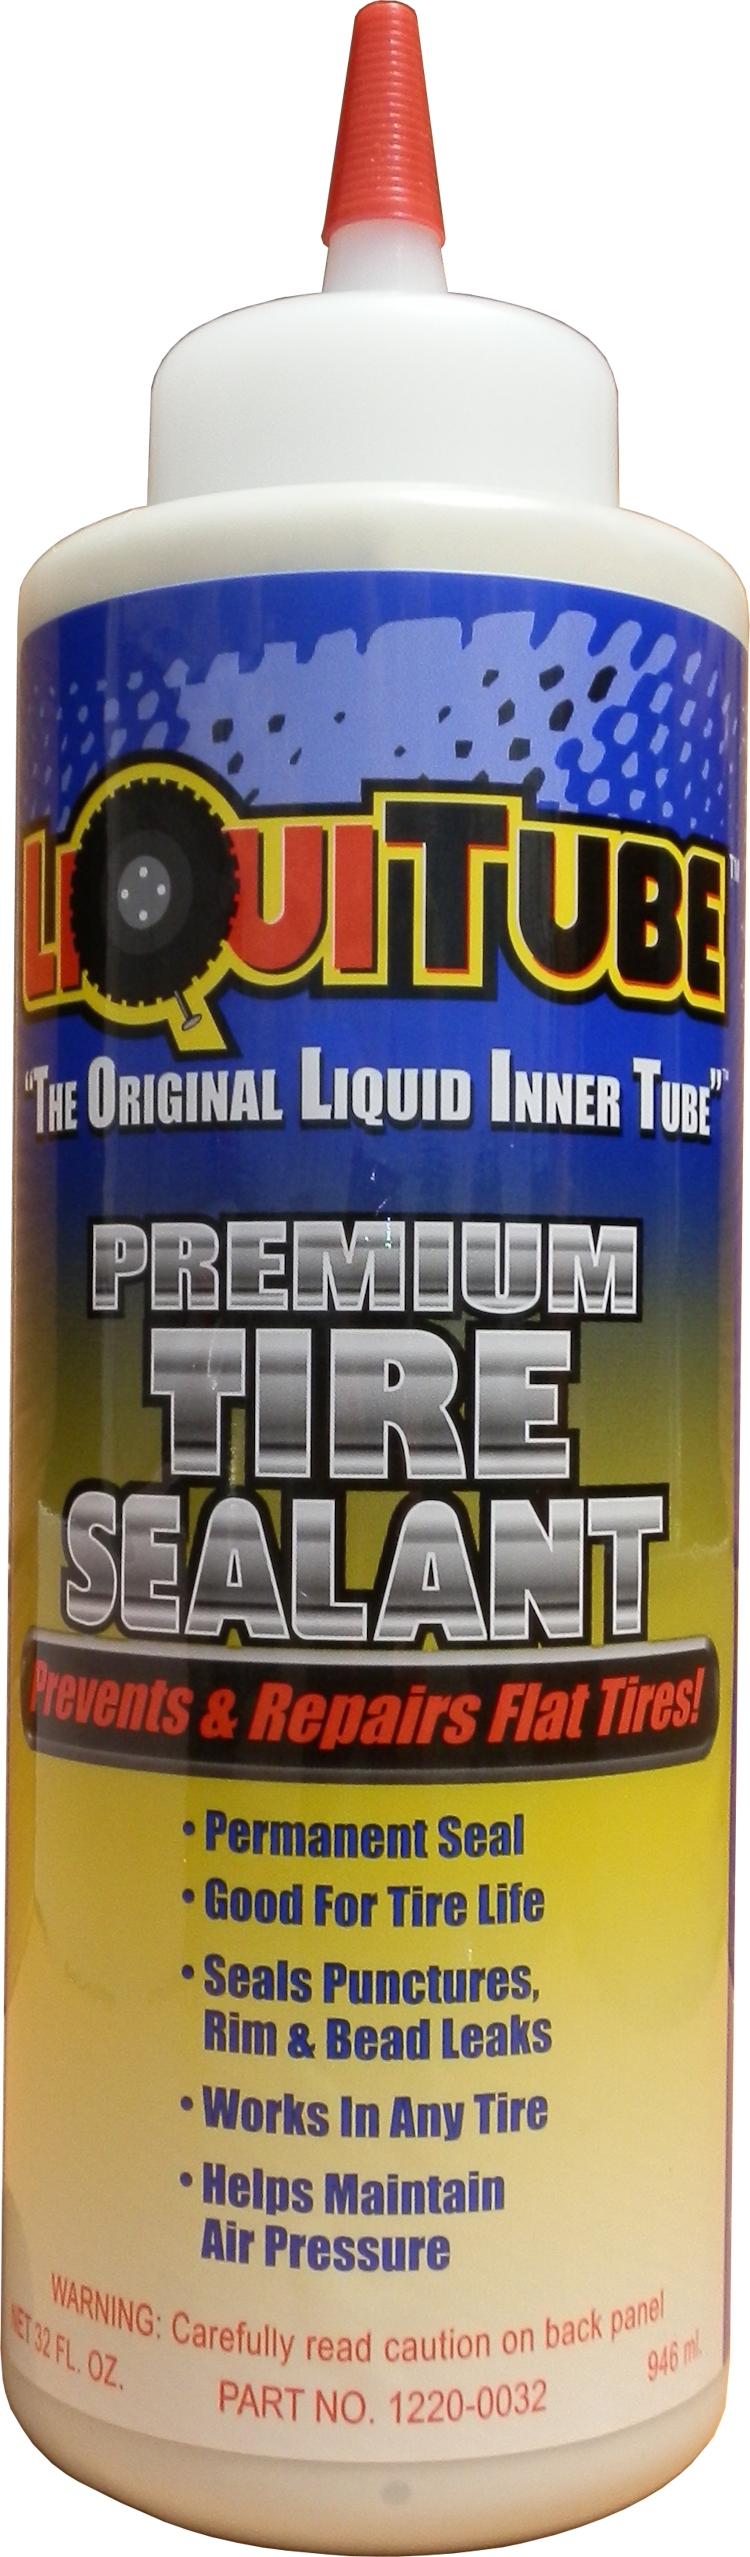 American Made LiquiTube Tire Sealant Coats Tires to Extend Life